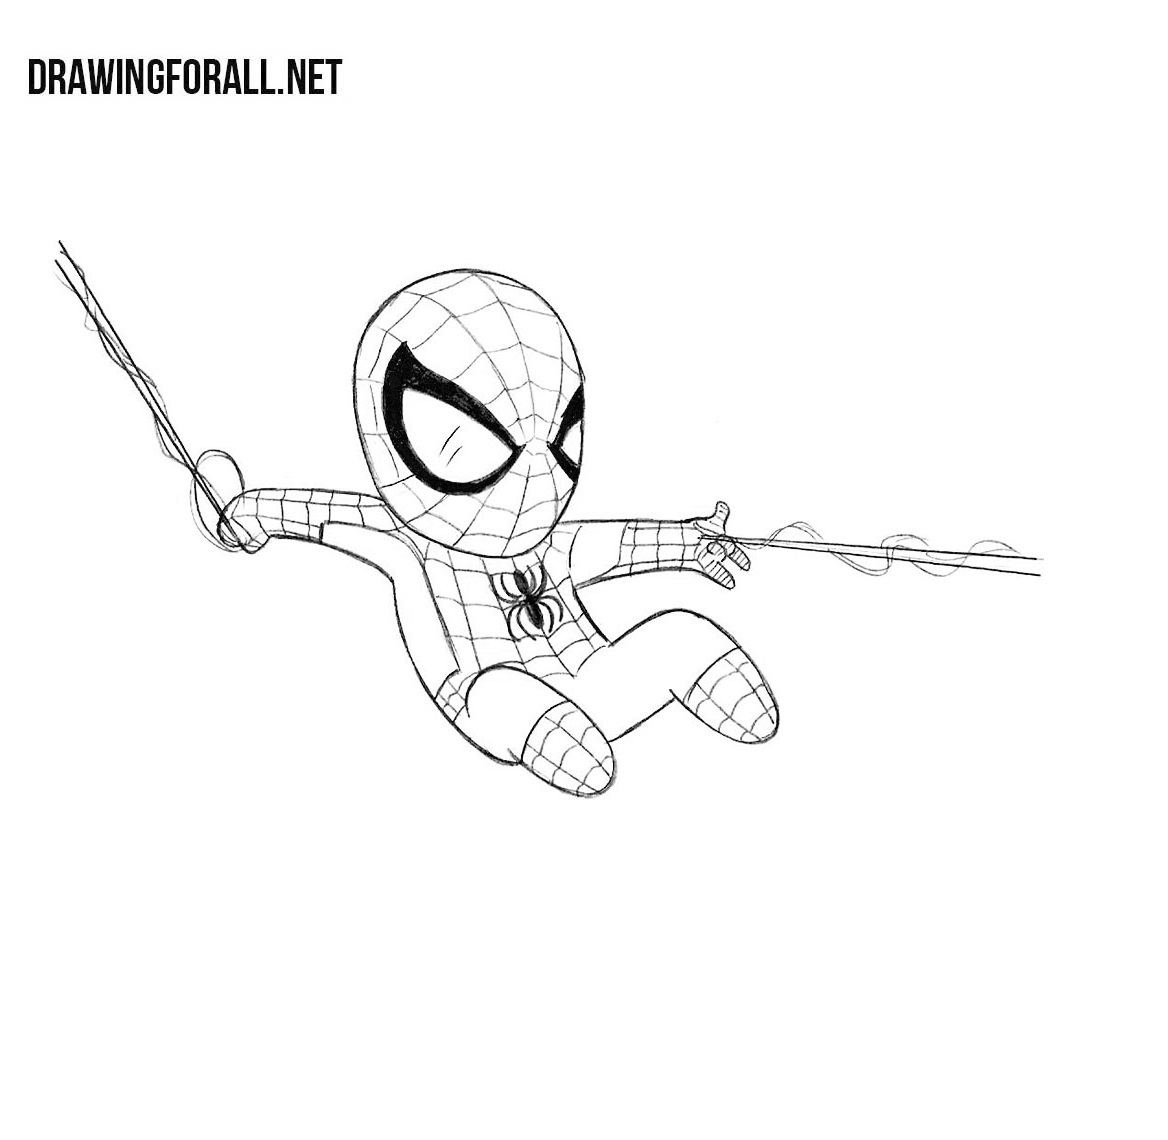 How to Draw Chibi Spider-man | Drawingforall.net